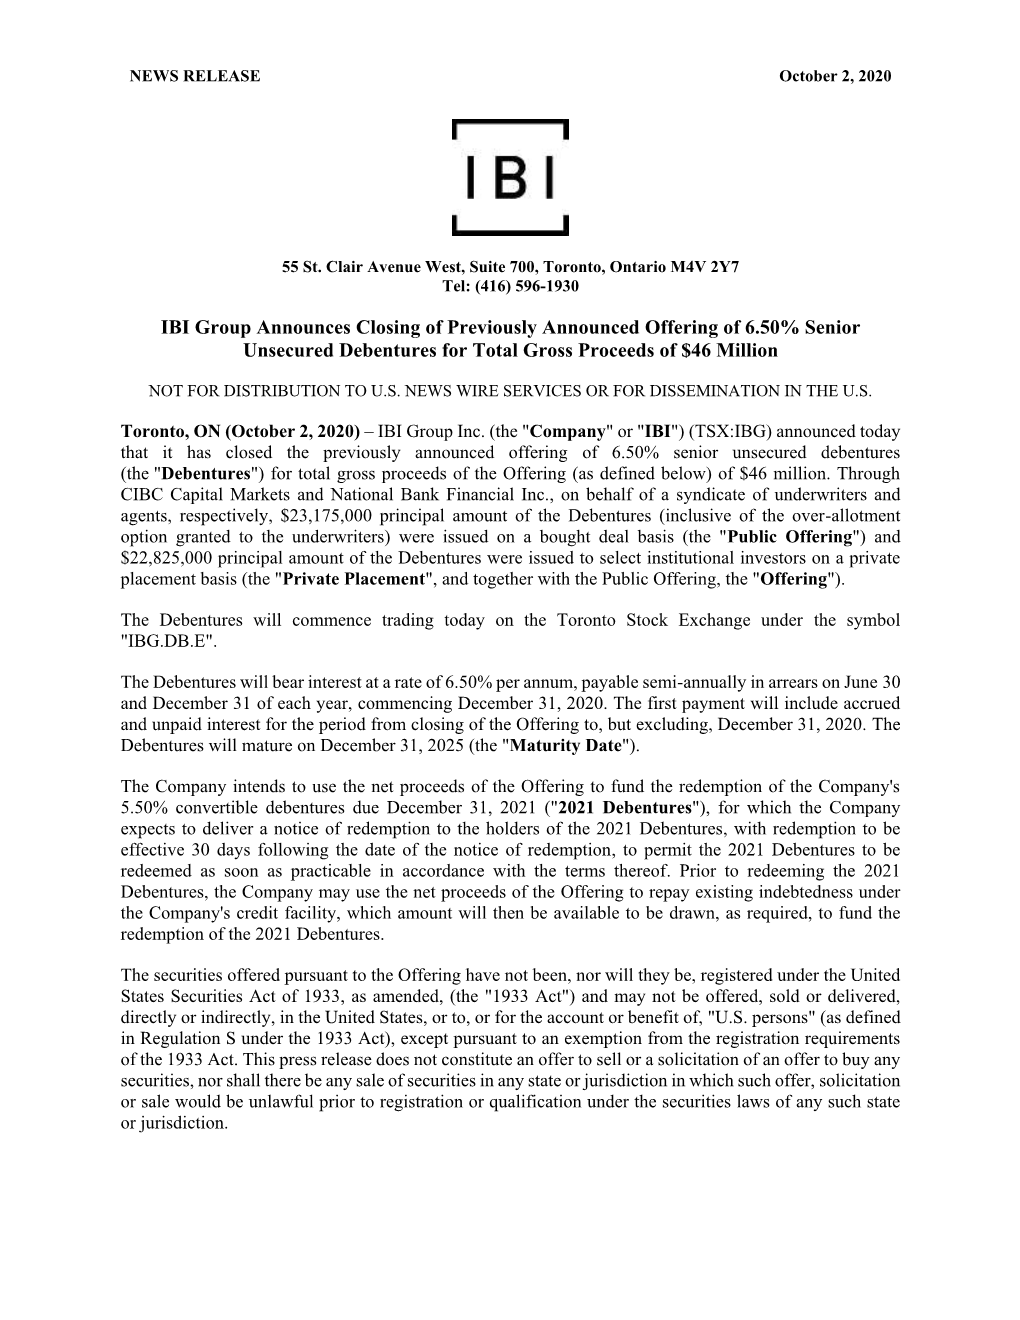 IBI Group Announces Closing of Previously Announced Offering of 6.50% Senior Unsecured Debentures for Total Gross Proceeds of $46 Million